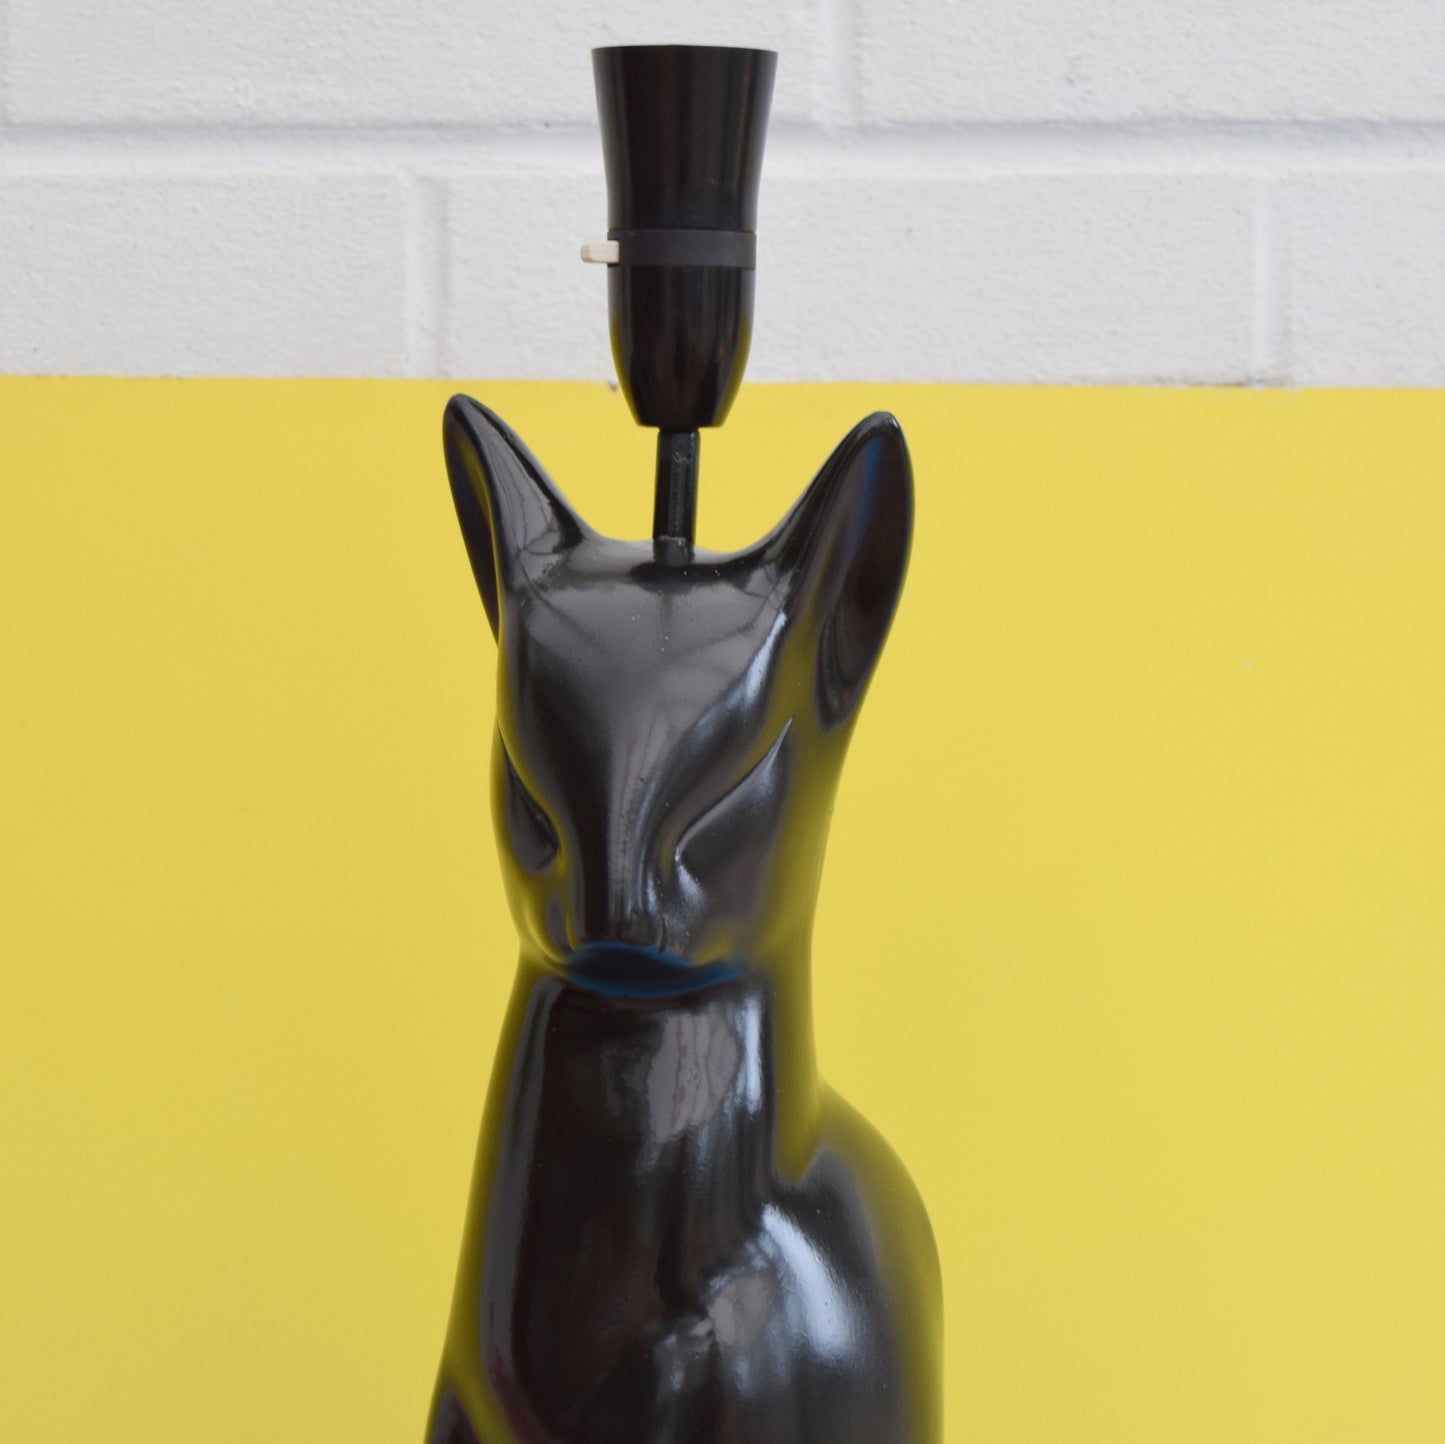 Vintage 1950s Large Cat Lamp - Inspired By The Chassagne Heals Cat - Black